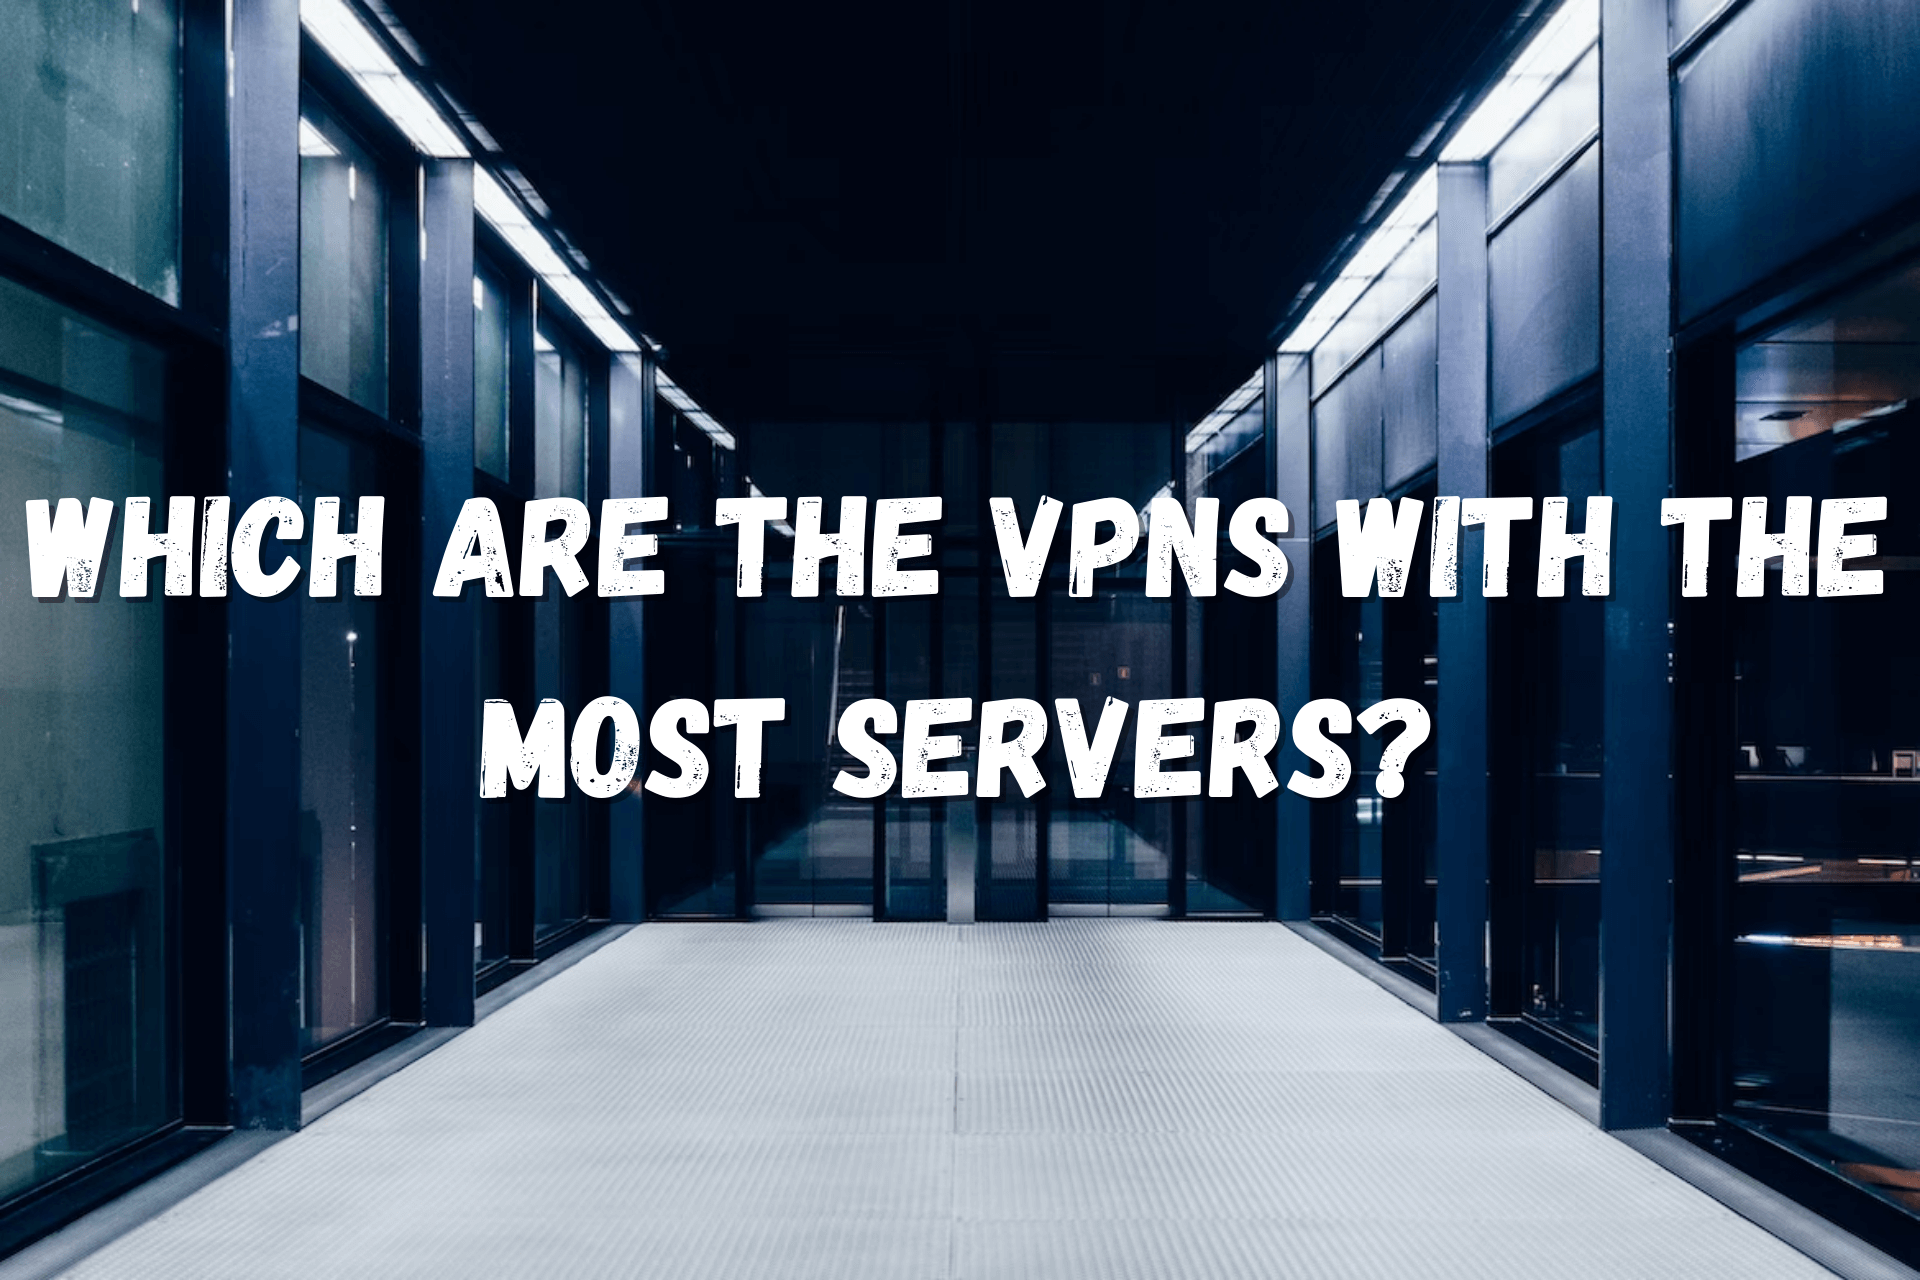 VPNs with most servers